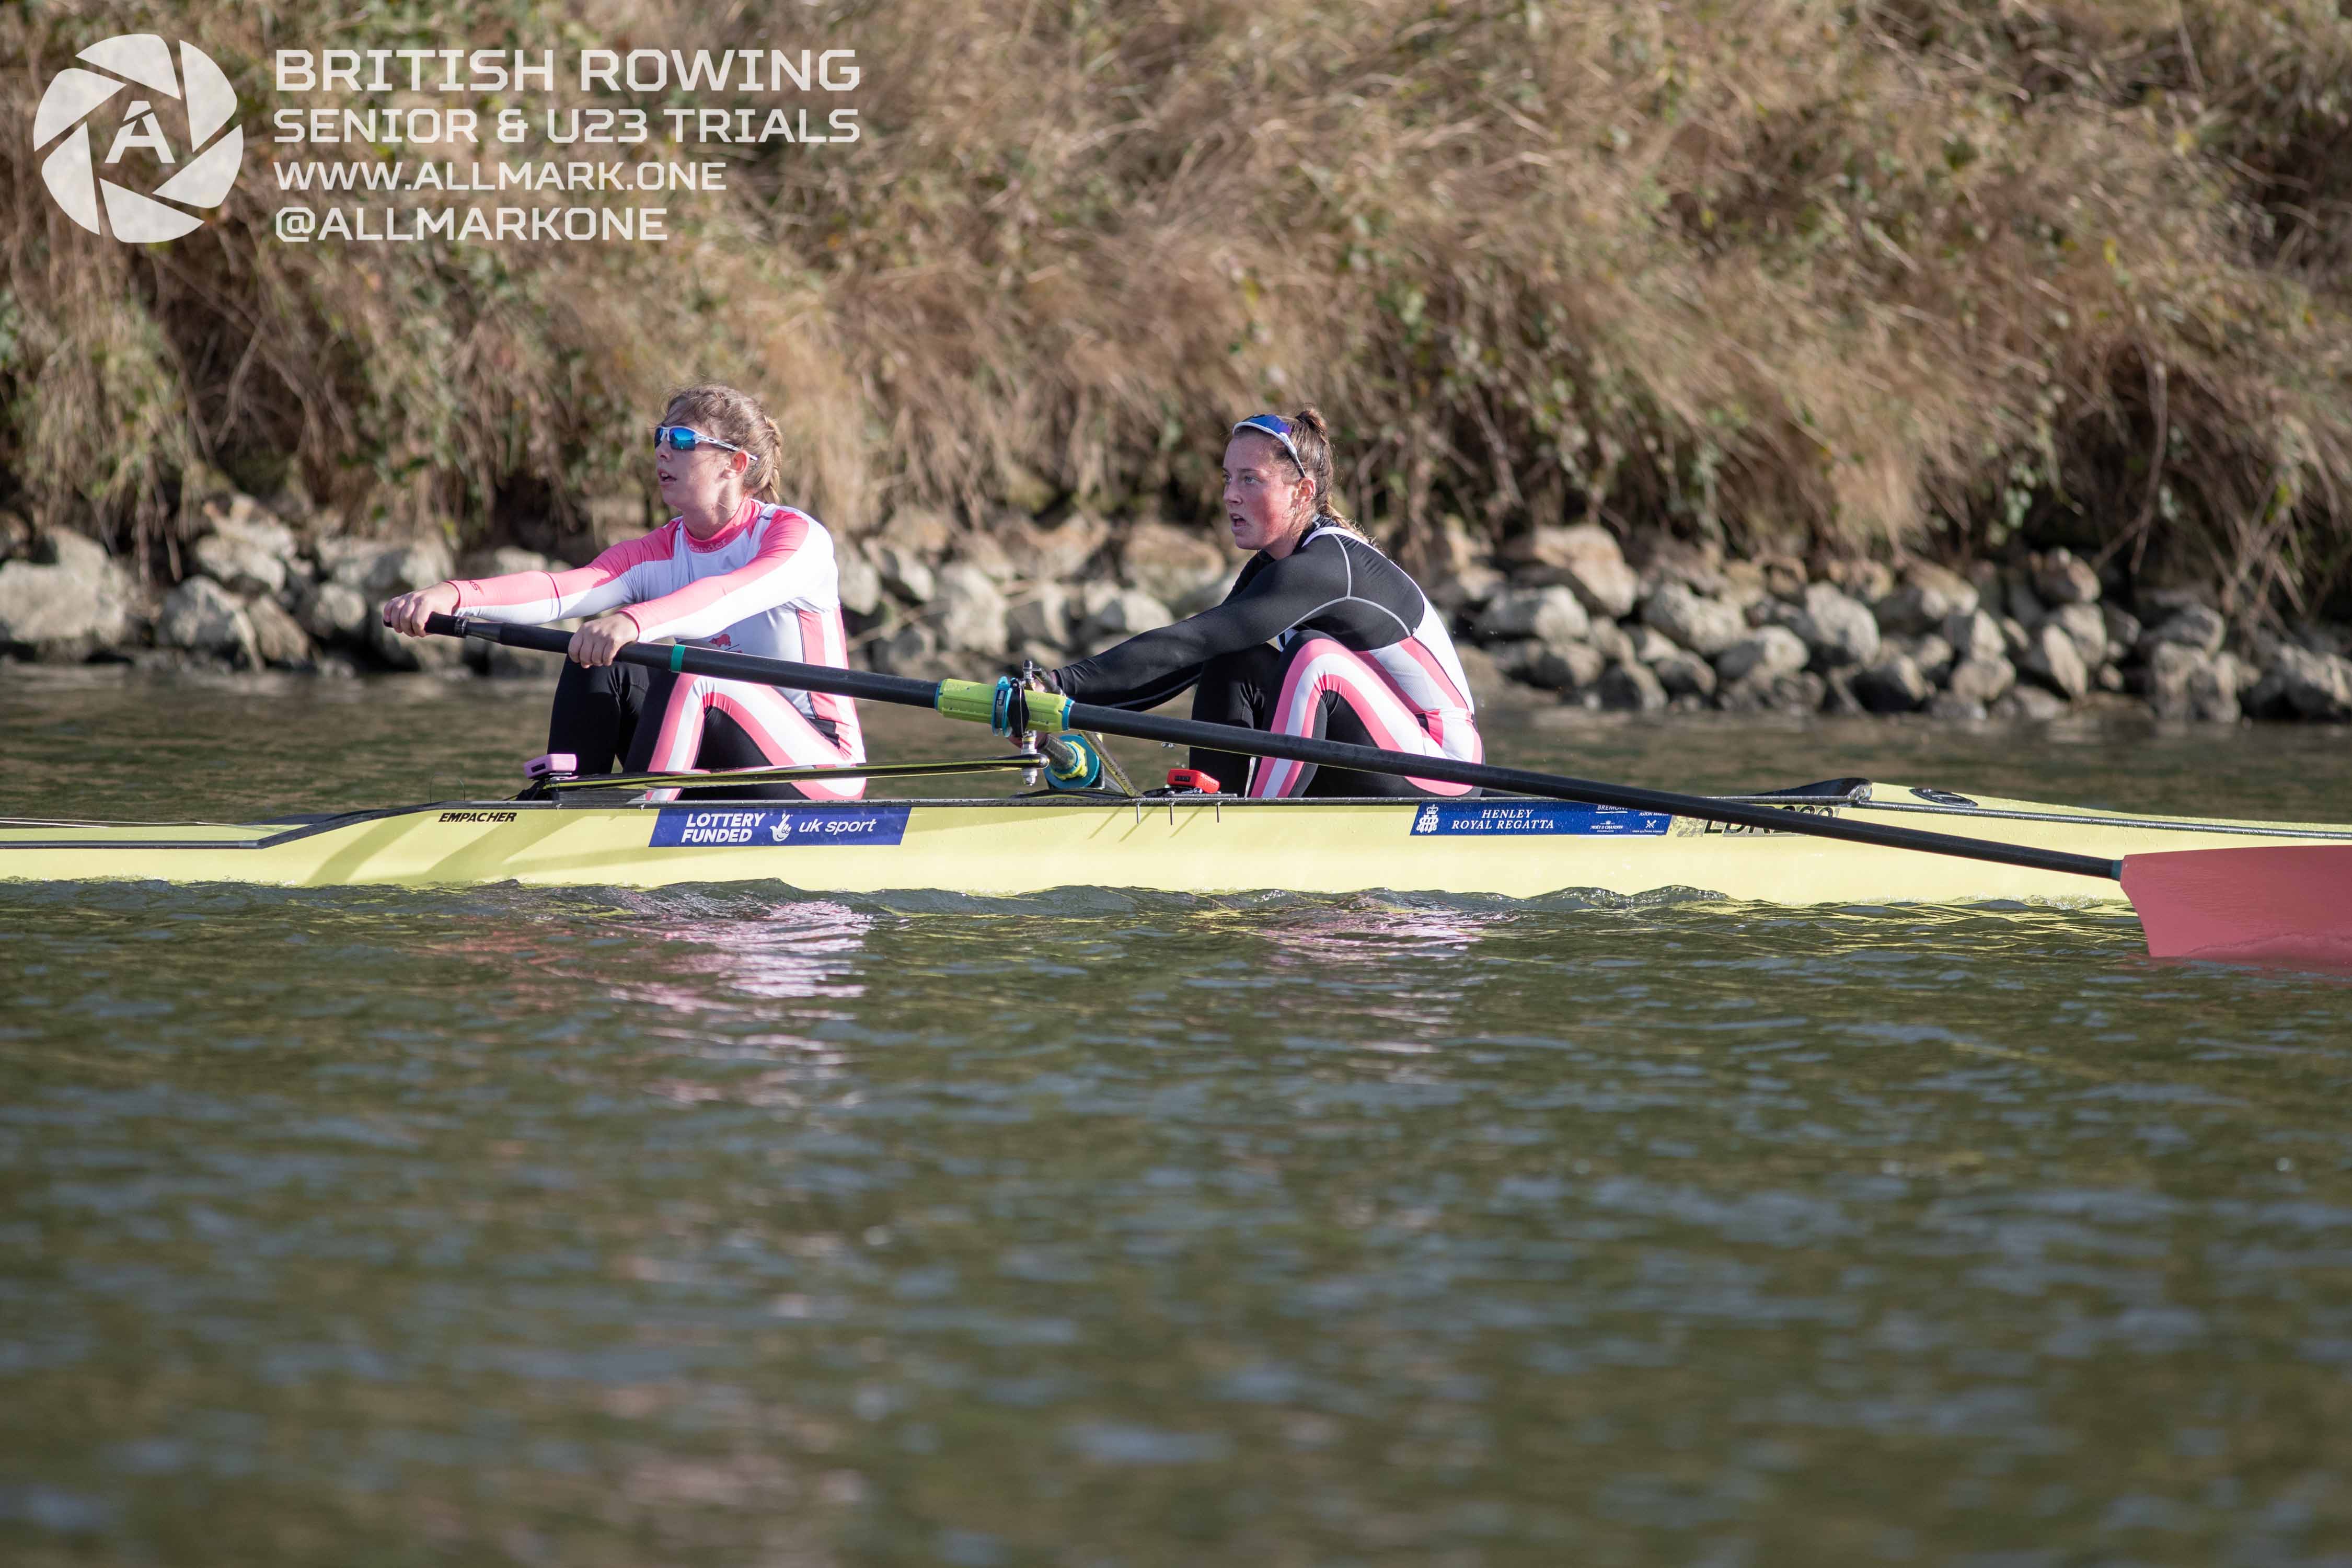 Abigail Topp rowing in GB Trials - Photo credit All Mark One